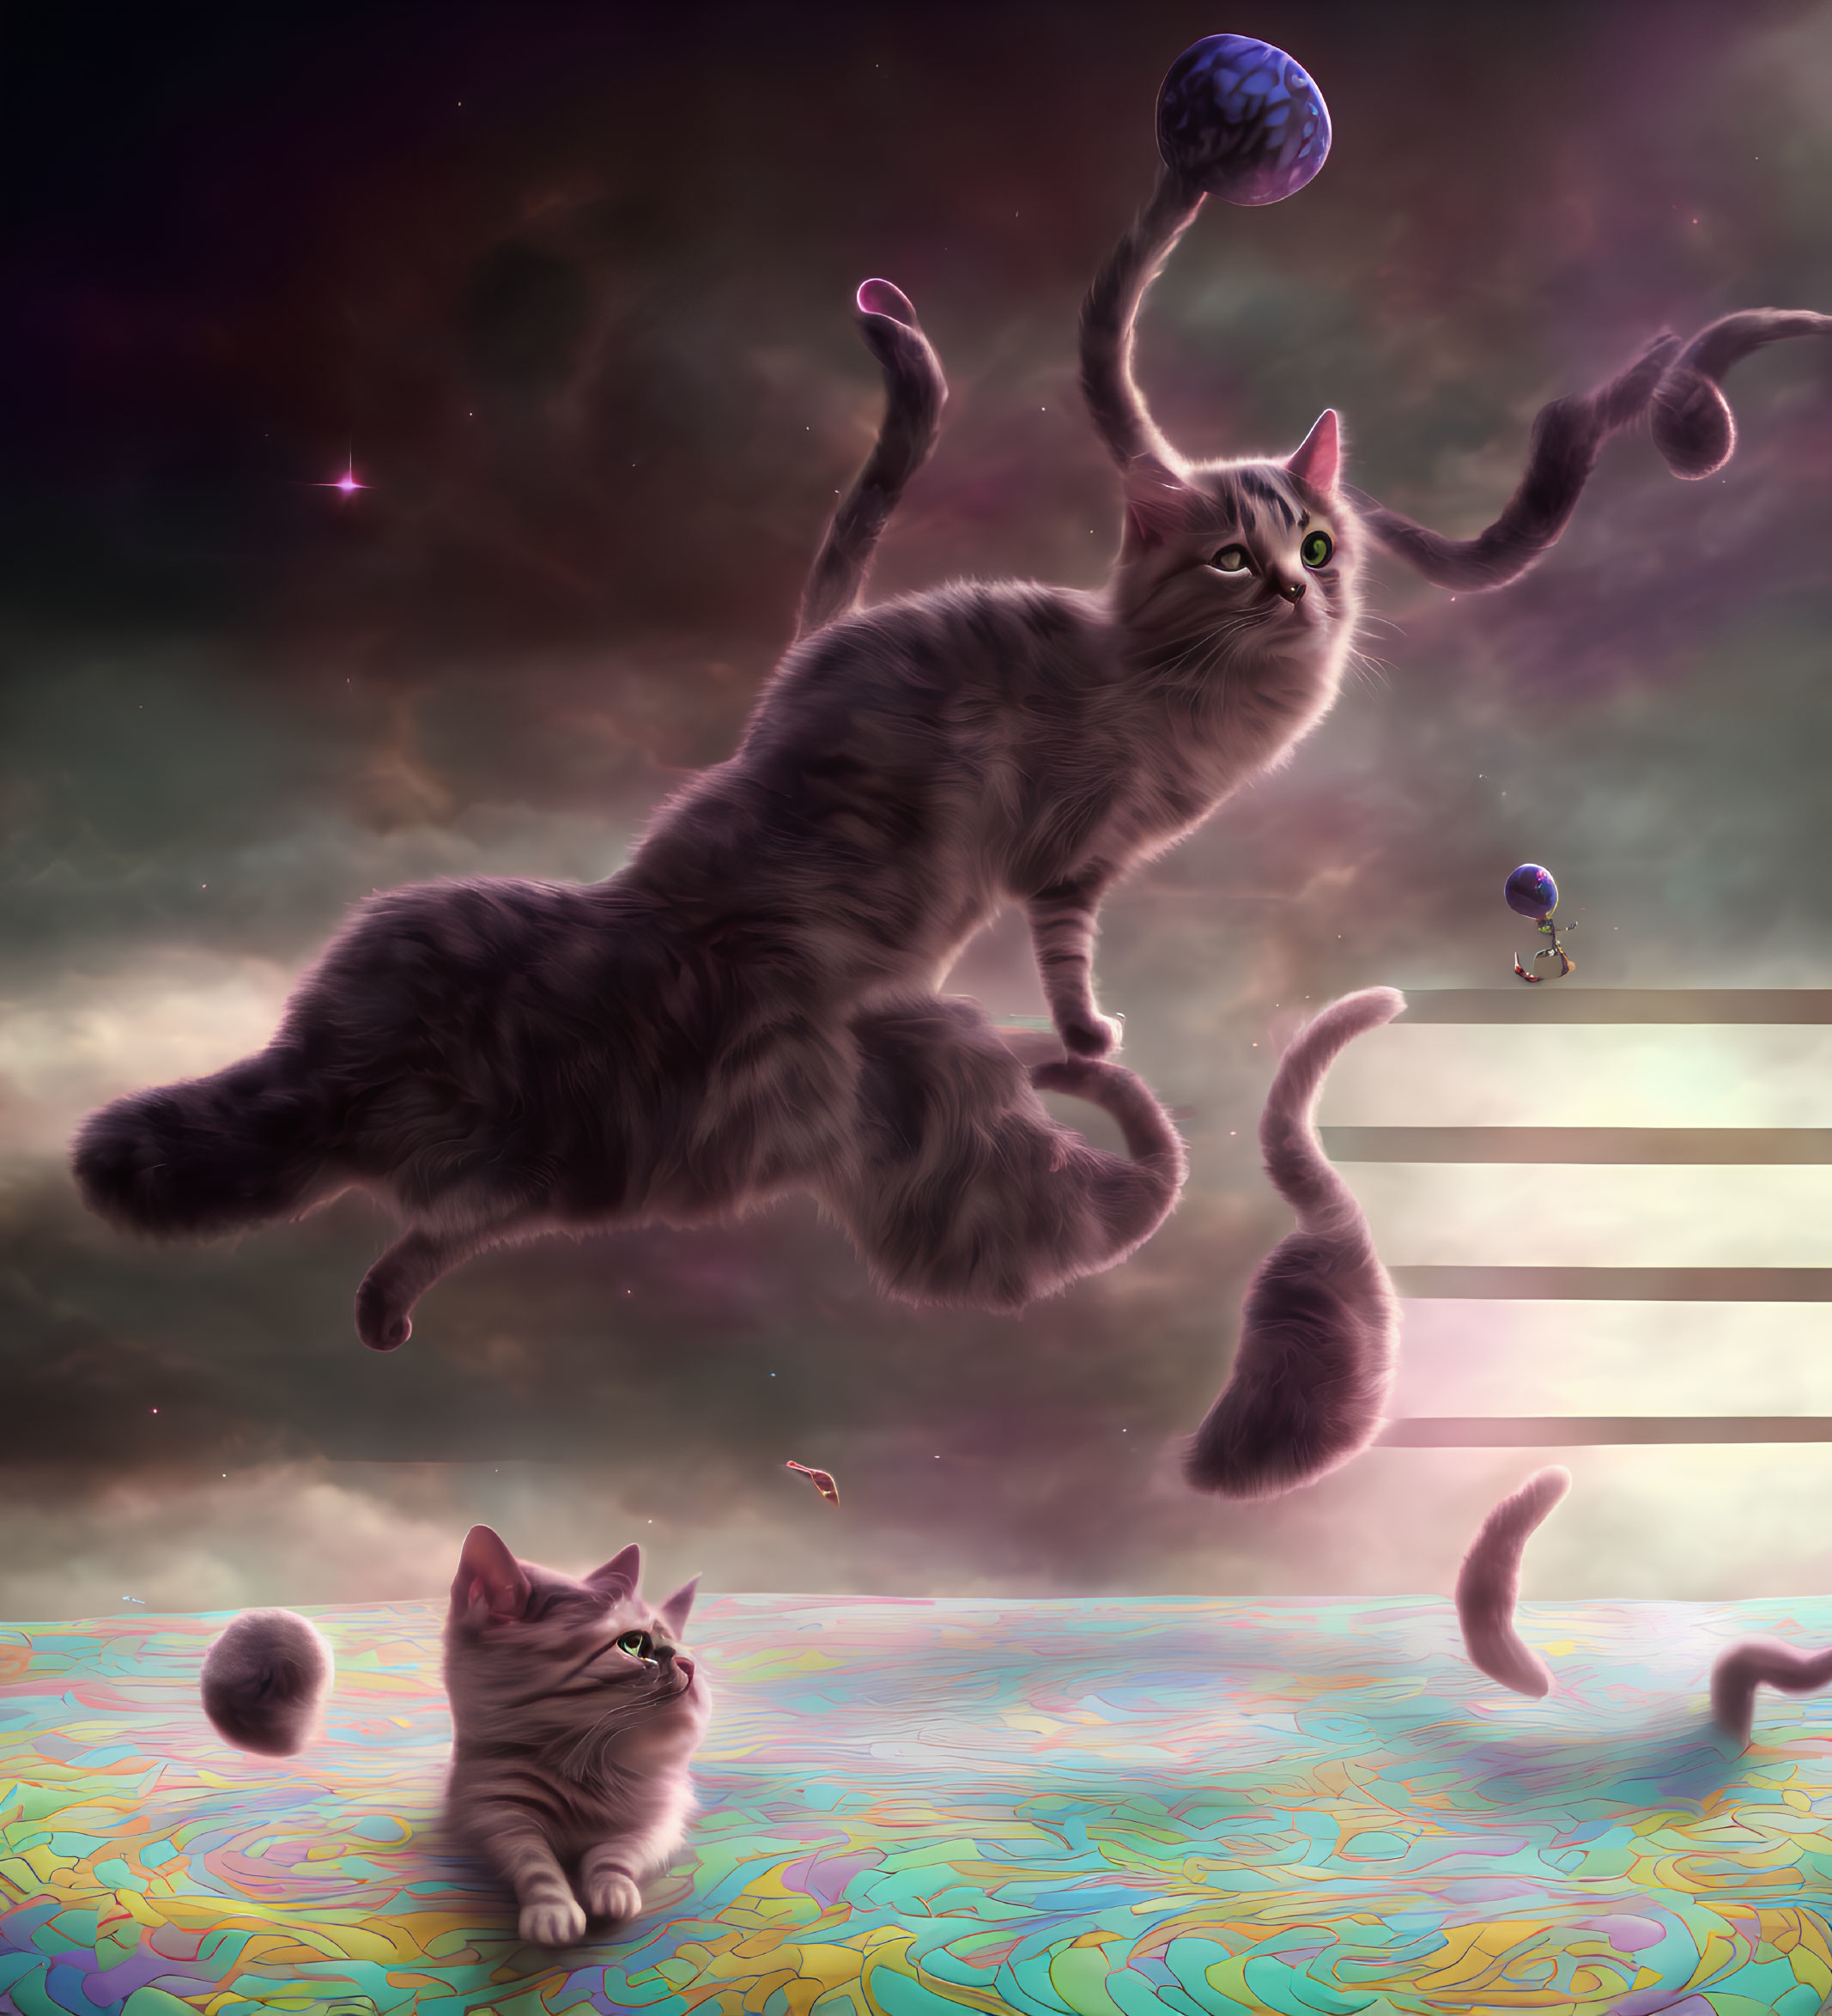 Surreal cosmic scene: cats with extended furry limbs against colorful nebulae and striped planet